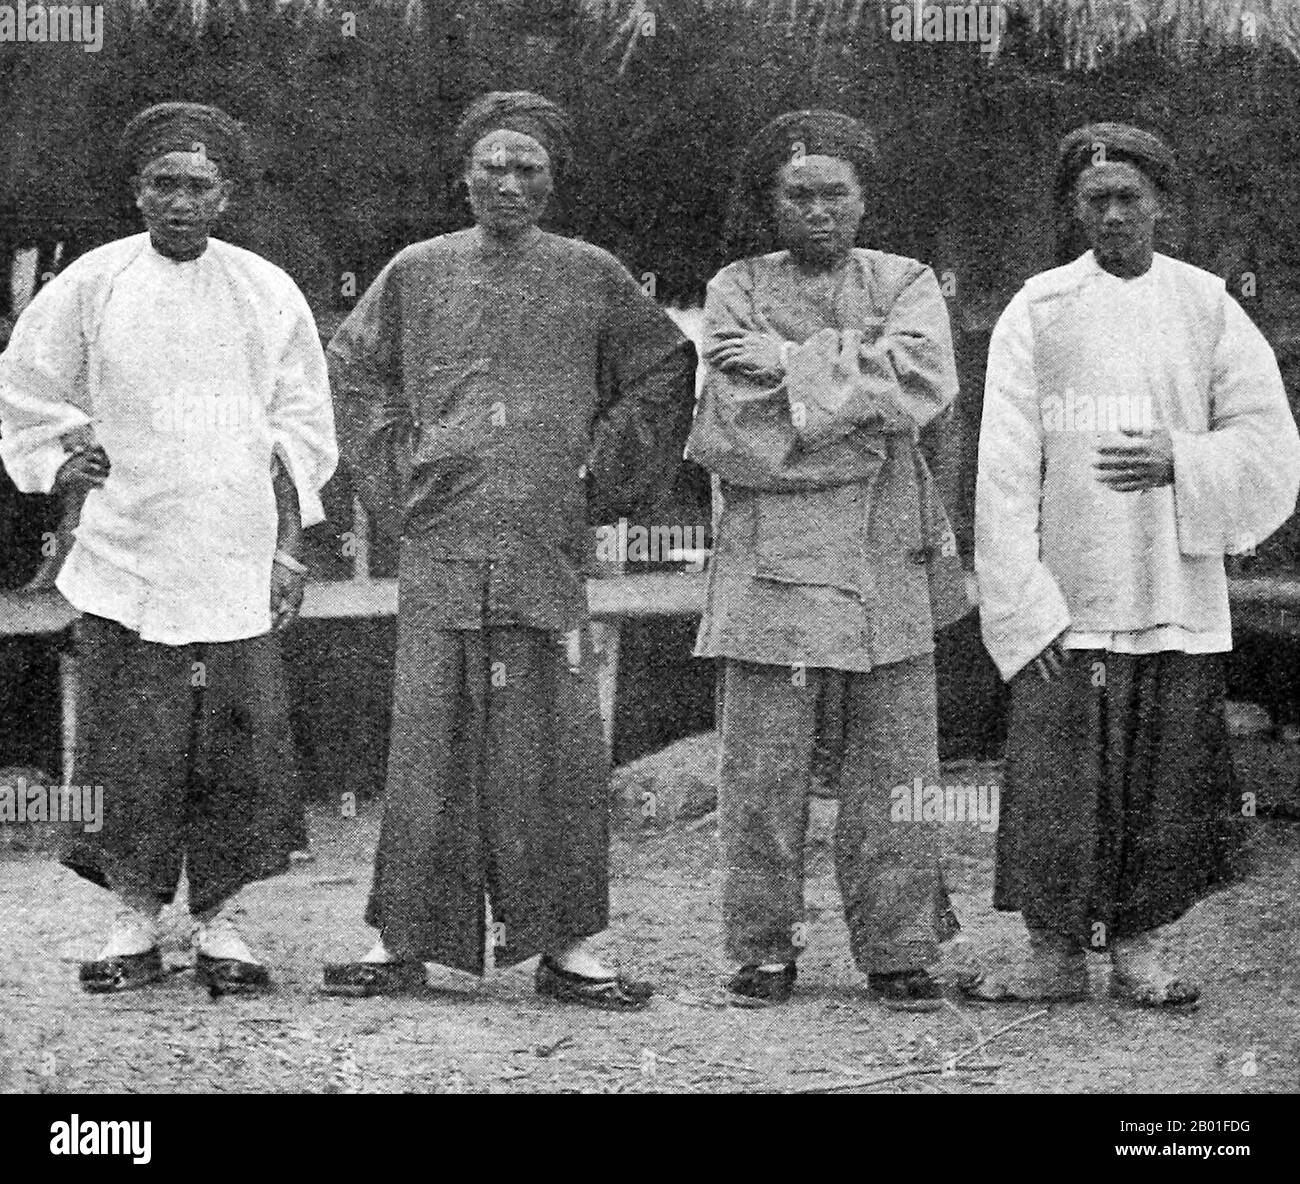 Vietnam: Deo Van Tri (Kham Oun), Lord of the Tai Federation of Sipsongchuthai (1849-1908) second left, with other White Tai leaders, c. 1890s.  During the late 19th century, all the territory stretching from Dien Bien Phu in the south to the Chinese frontier in the north formed an autonomous region called Sipsongchutai, or ‘Twelve Tai Principalities’. It was ruled over by a hereditary White Tai prince from his capital at Lai Chau and paid tribute, at one time or another, to Siam, Vietnam or China, and sometimes to all three. Stock Photo